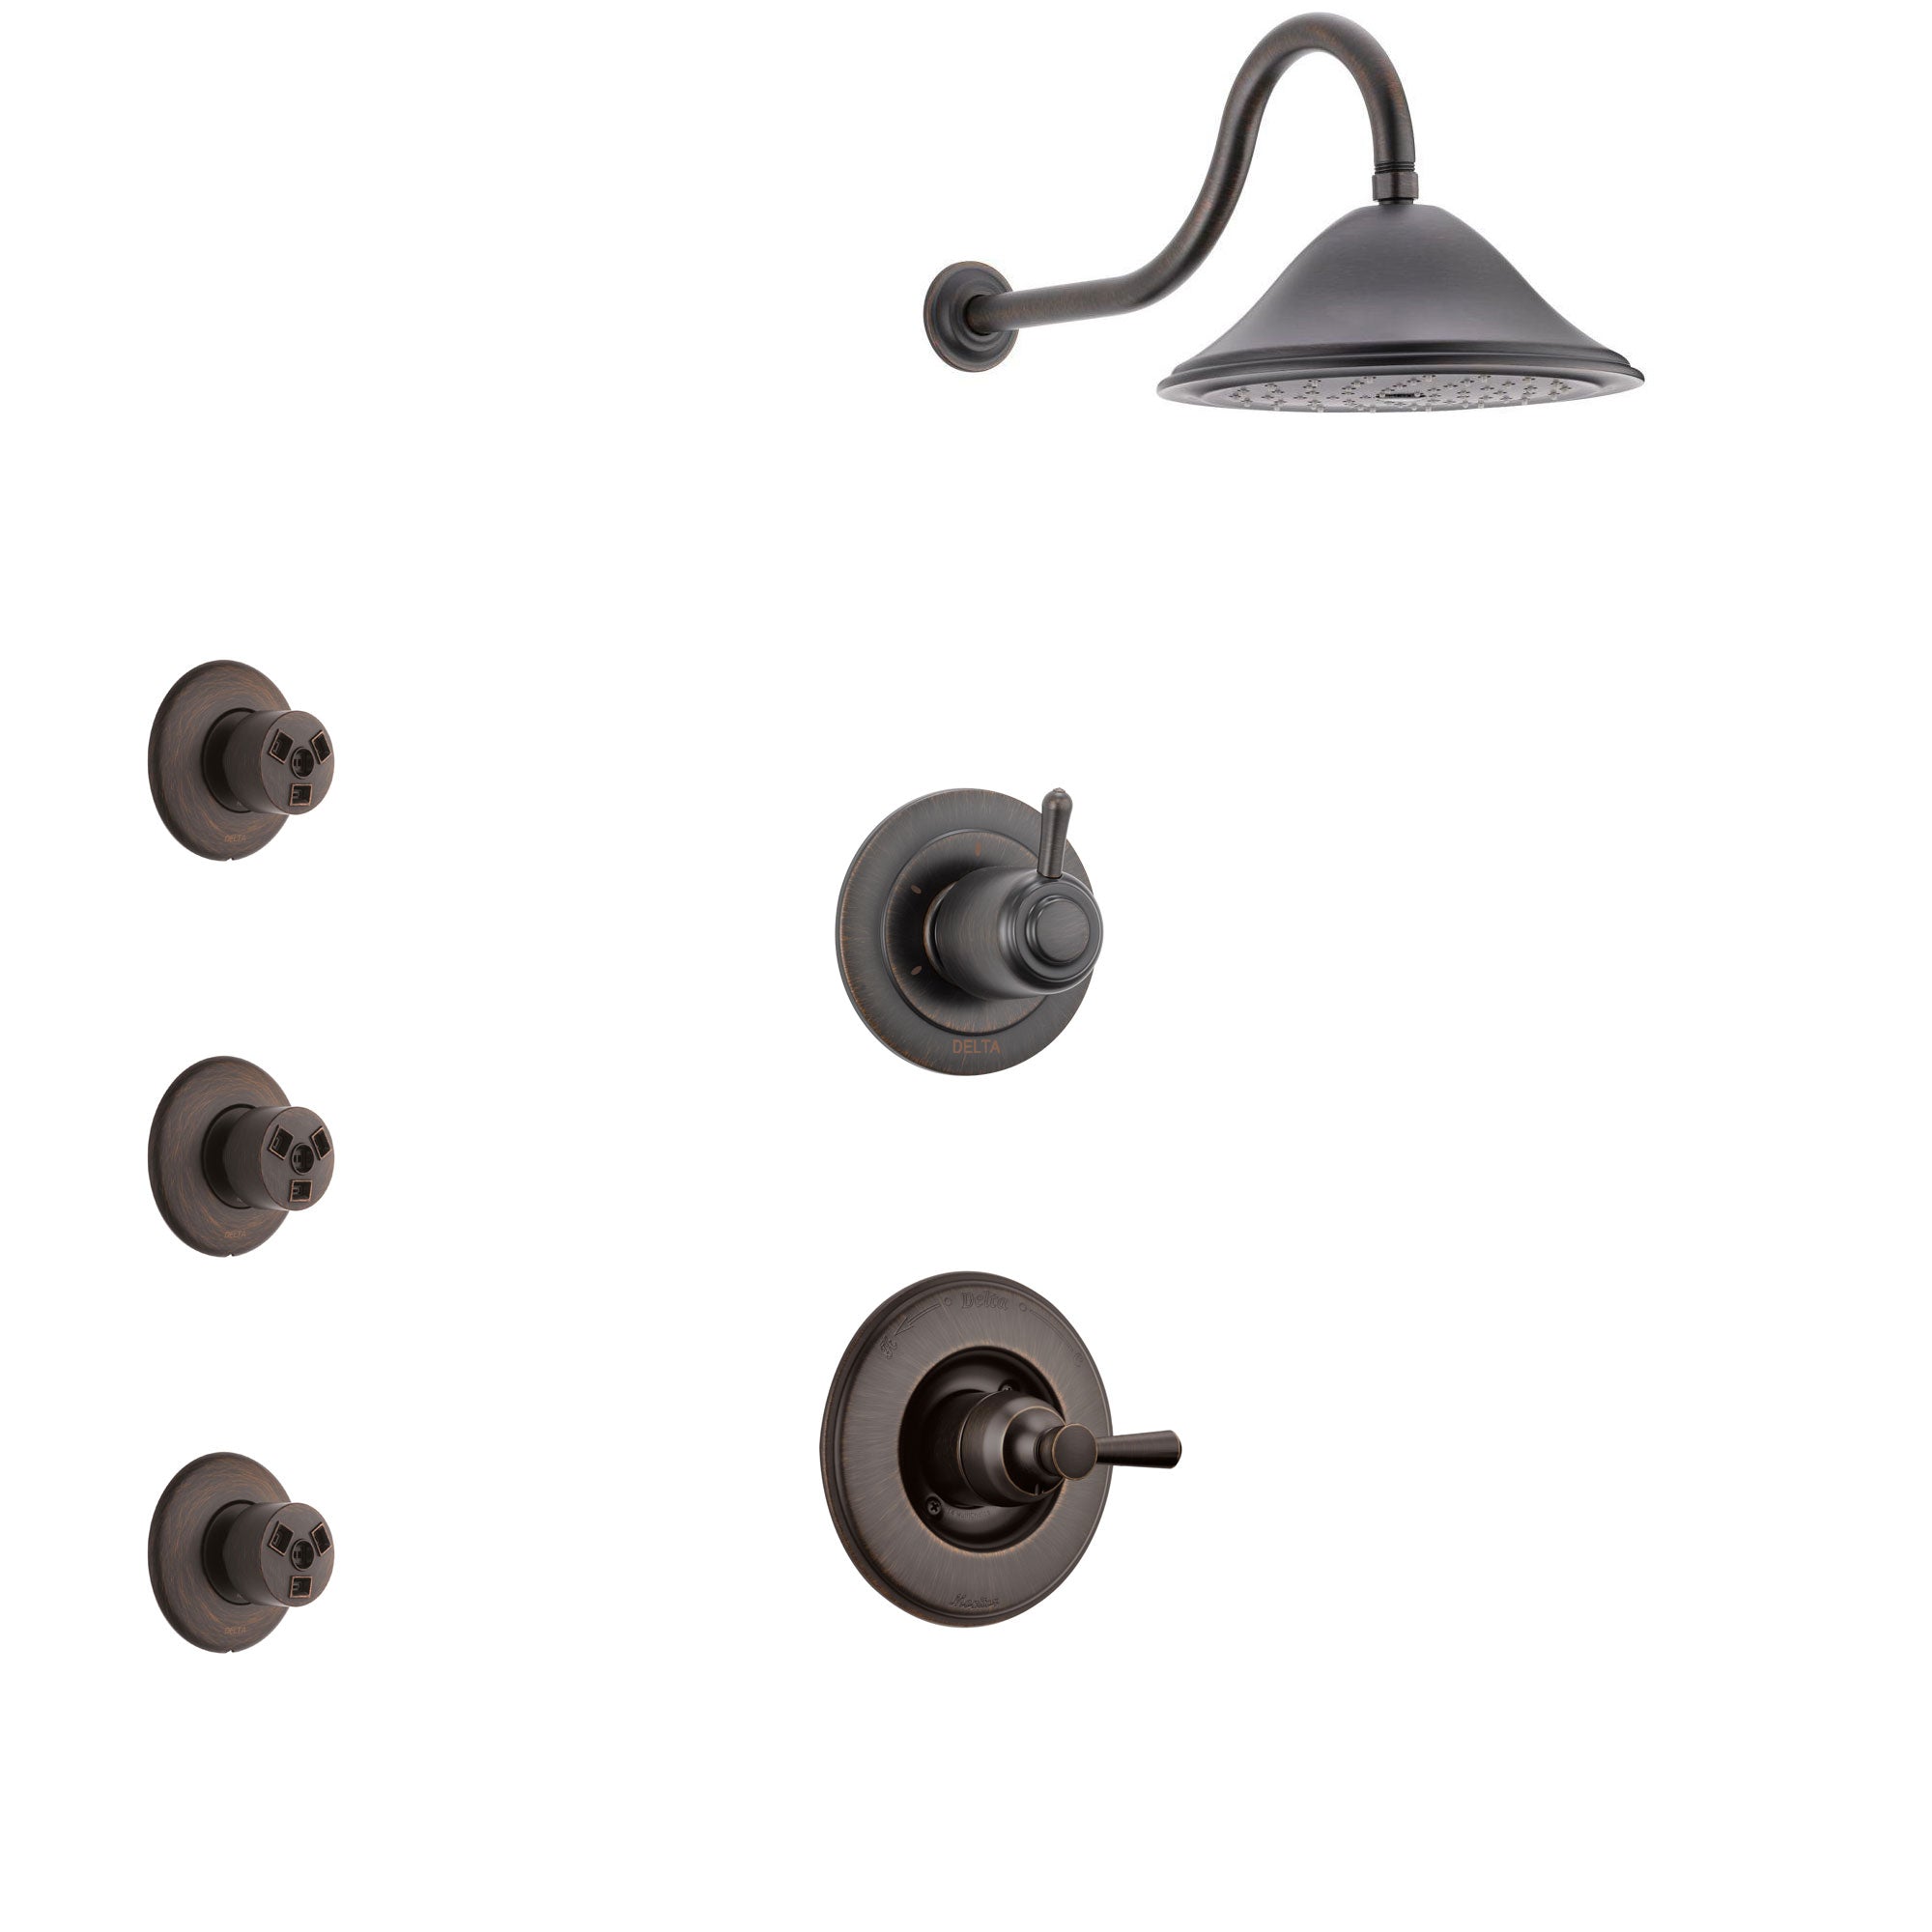 Delta Linden Venetian Bronze Finish Shower System with Control Handle, 3-Setting Diverter, Showerhead, and 3 Body Sprays SS1493RB3